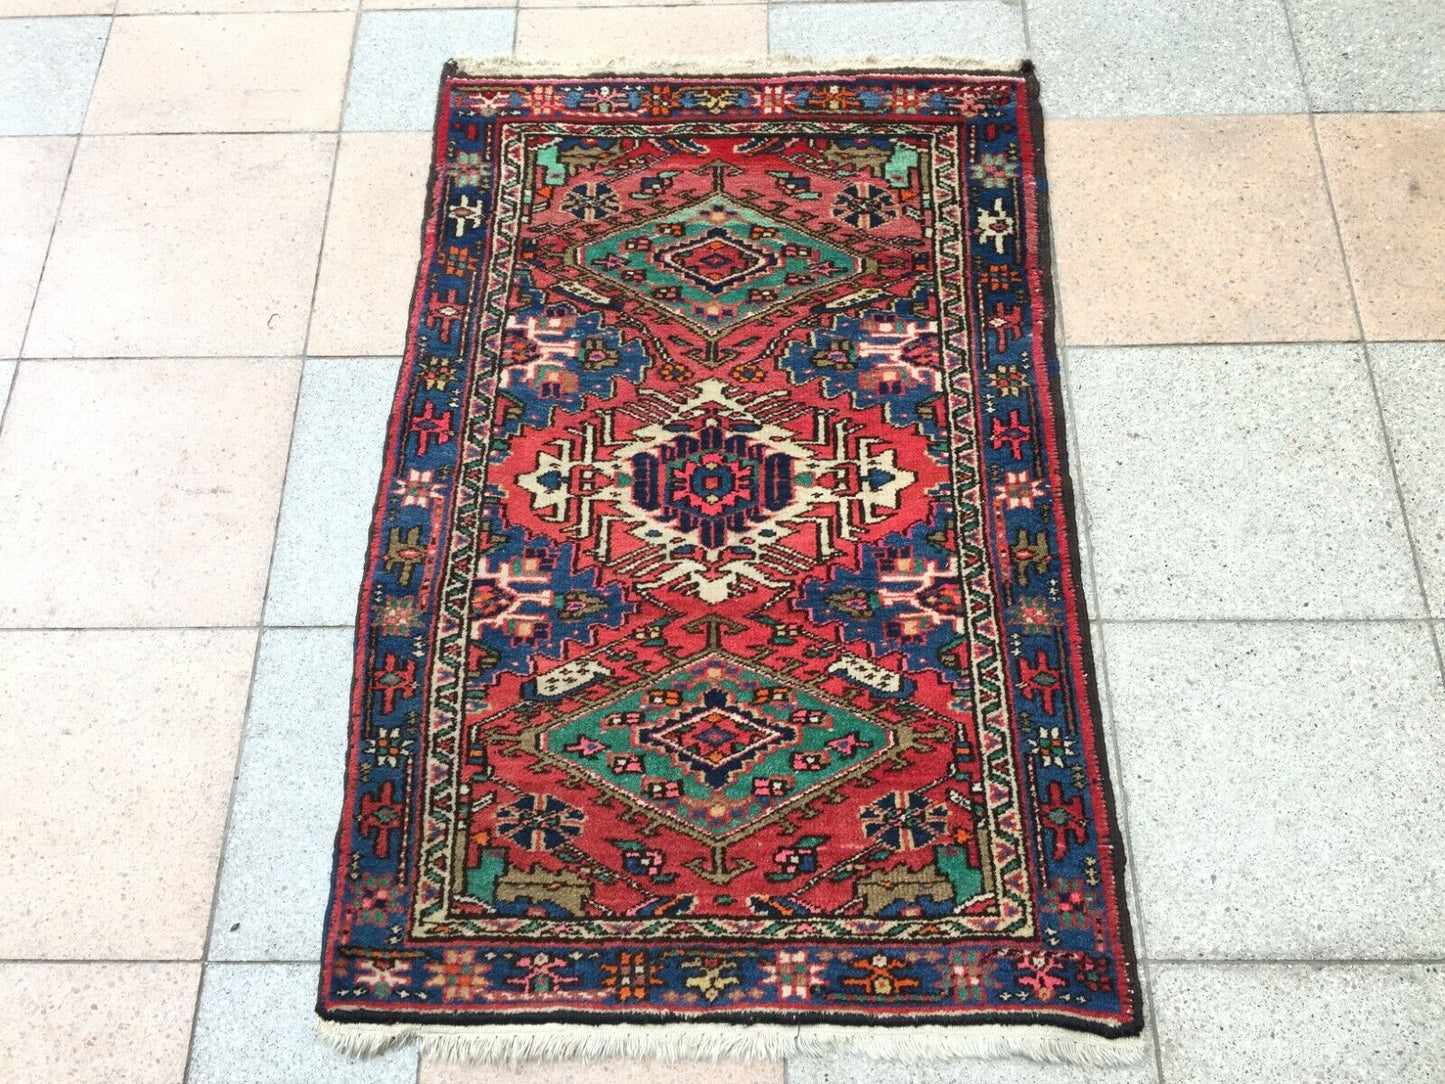 Good Condition Reflecting Quality and Care of Handmade Vintage Hamadan Rug - 1960s